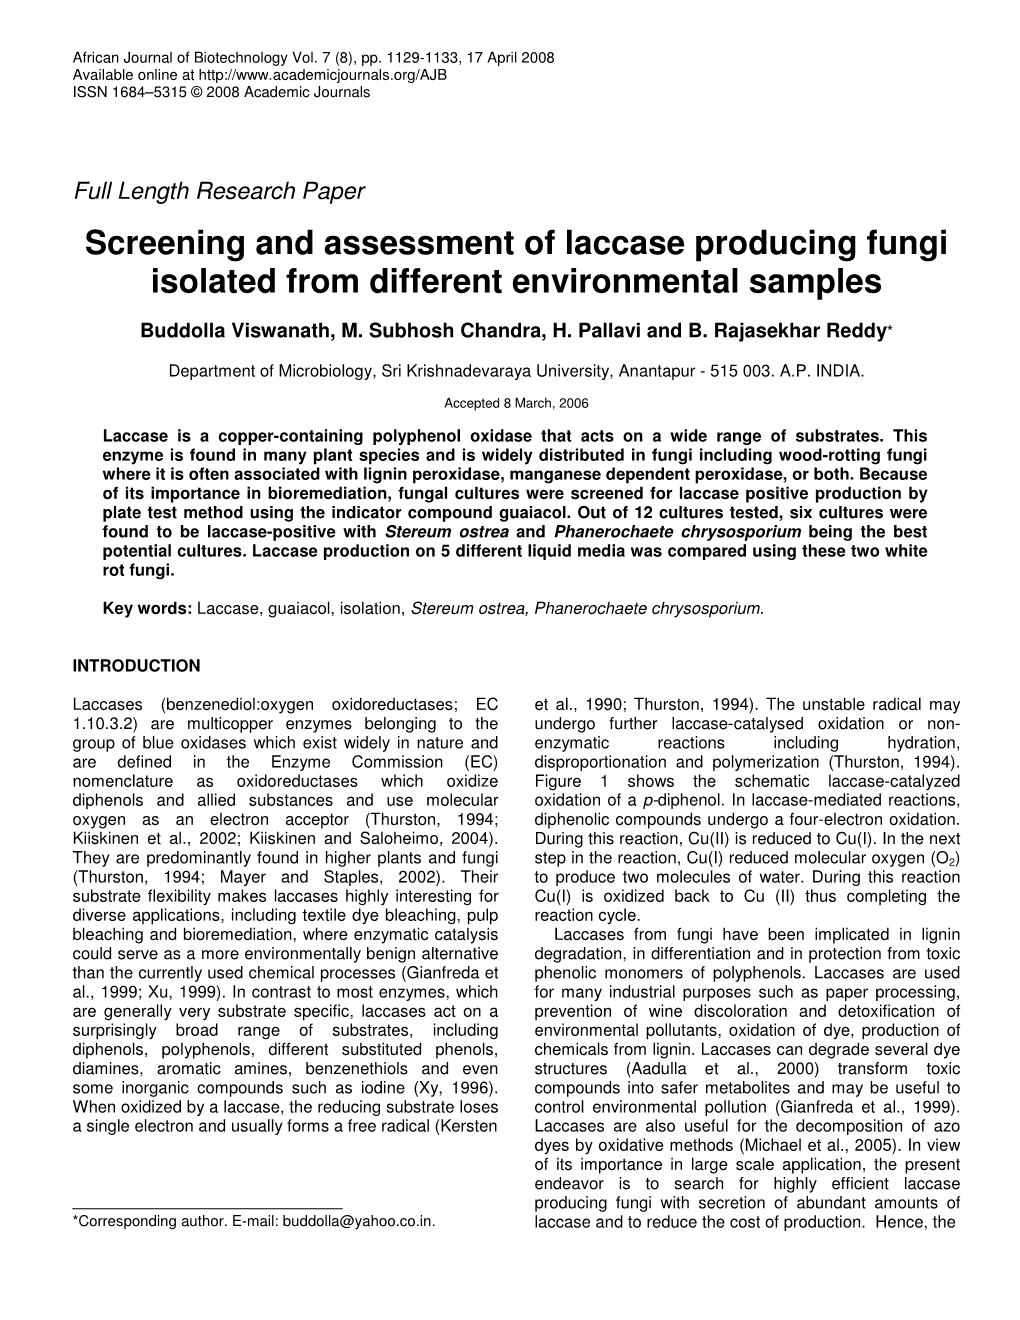 Screening and Assessment of Laccase Producing Fungi Isolated from Different Environmental Samples